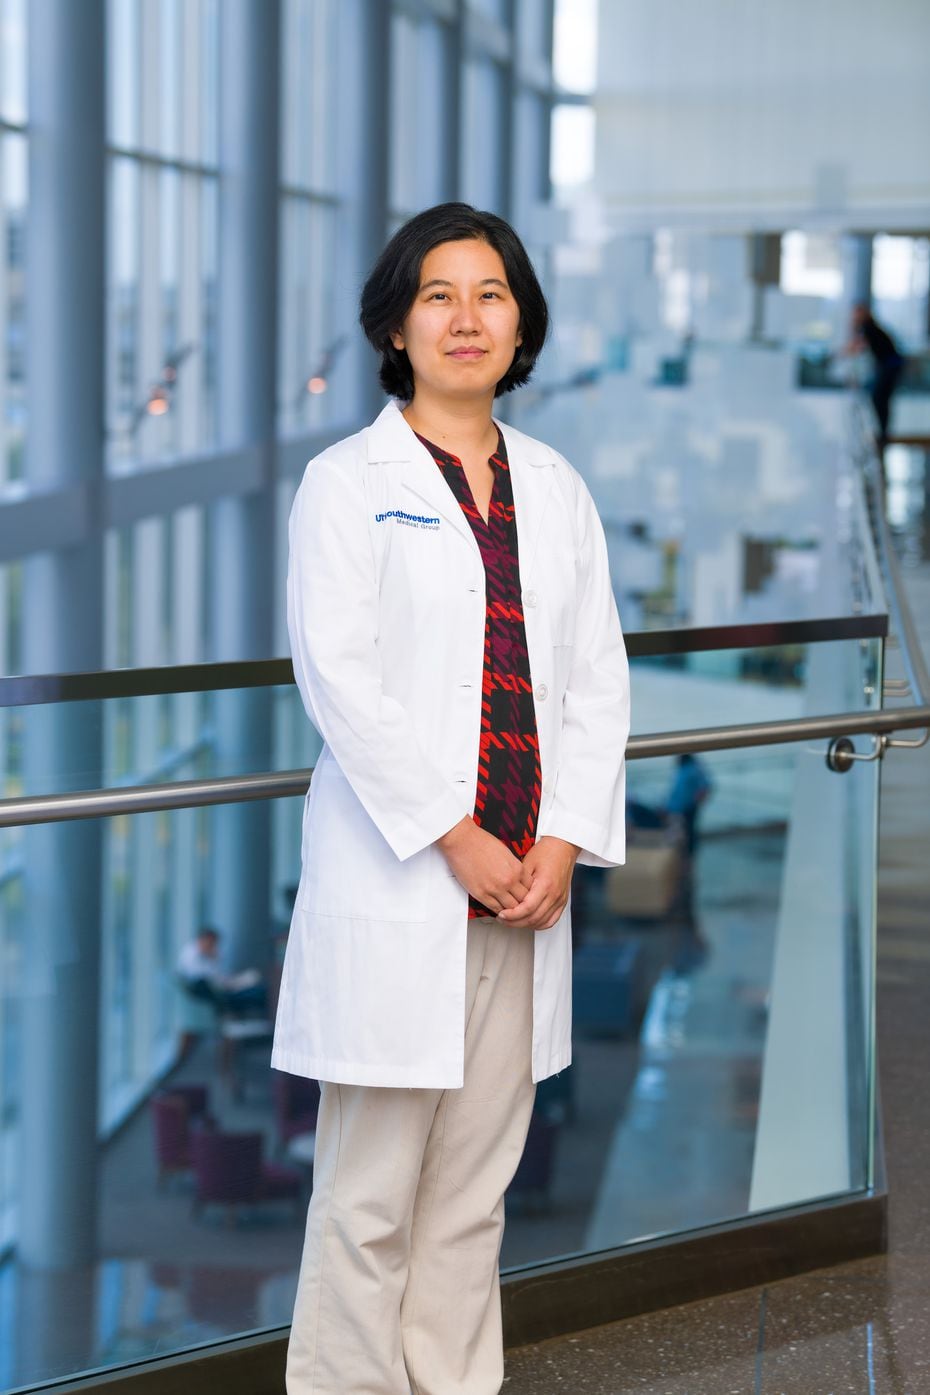 Dr. Angeline Wang says there are excellent treatment options for many patients with age-related macular degeneration.